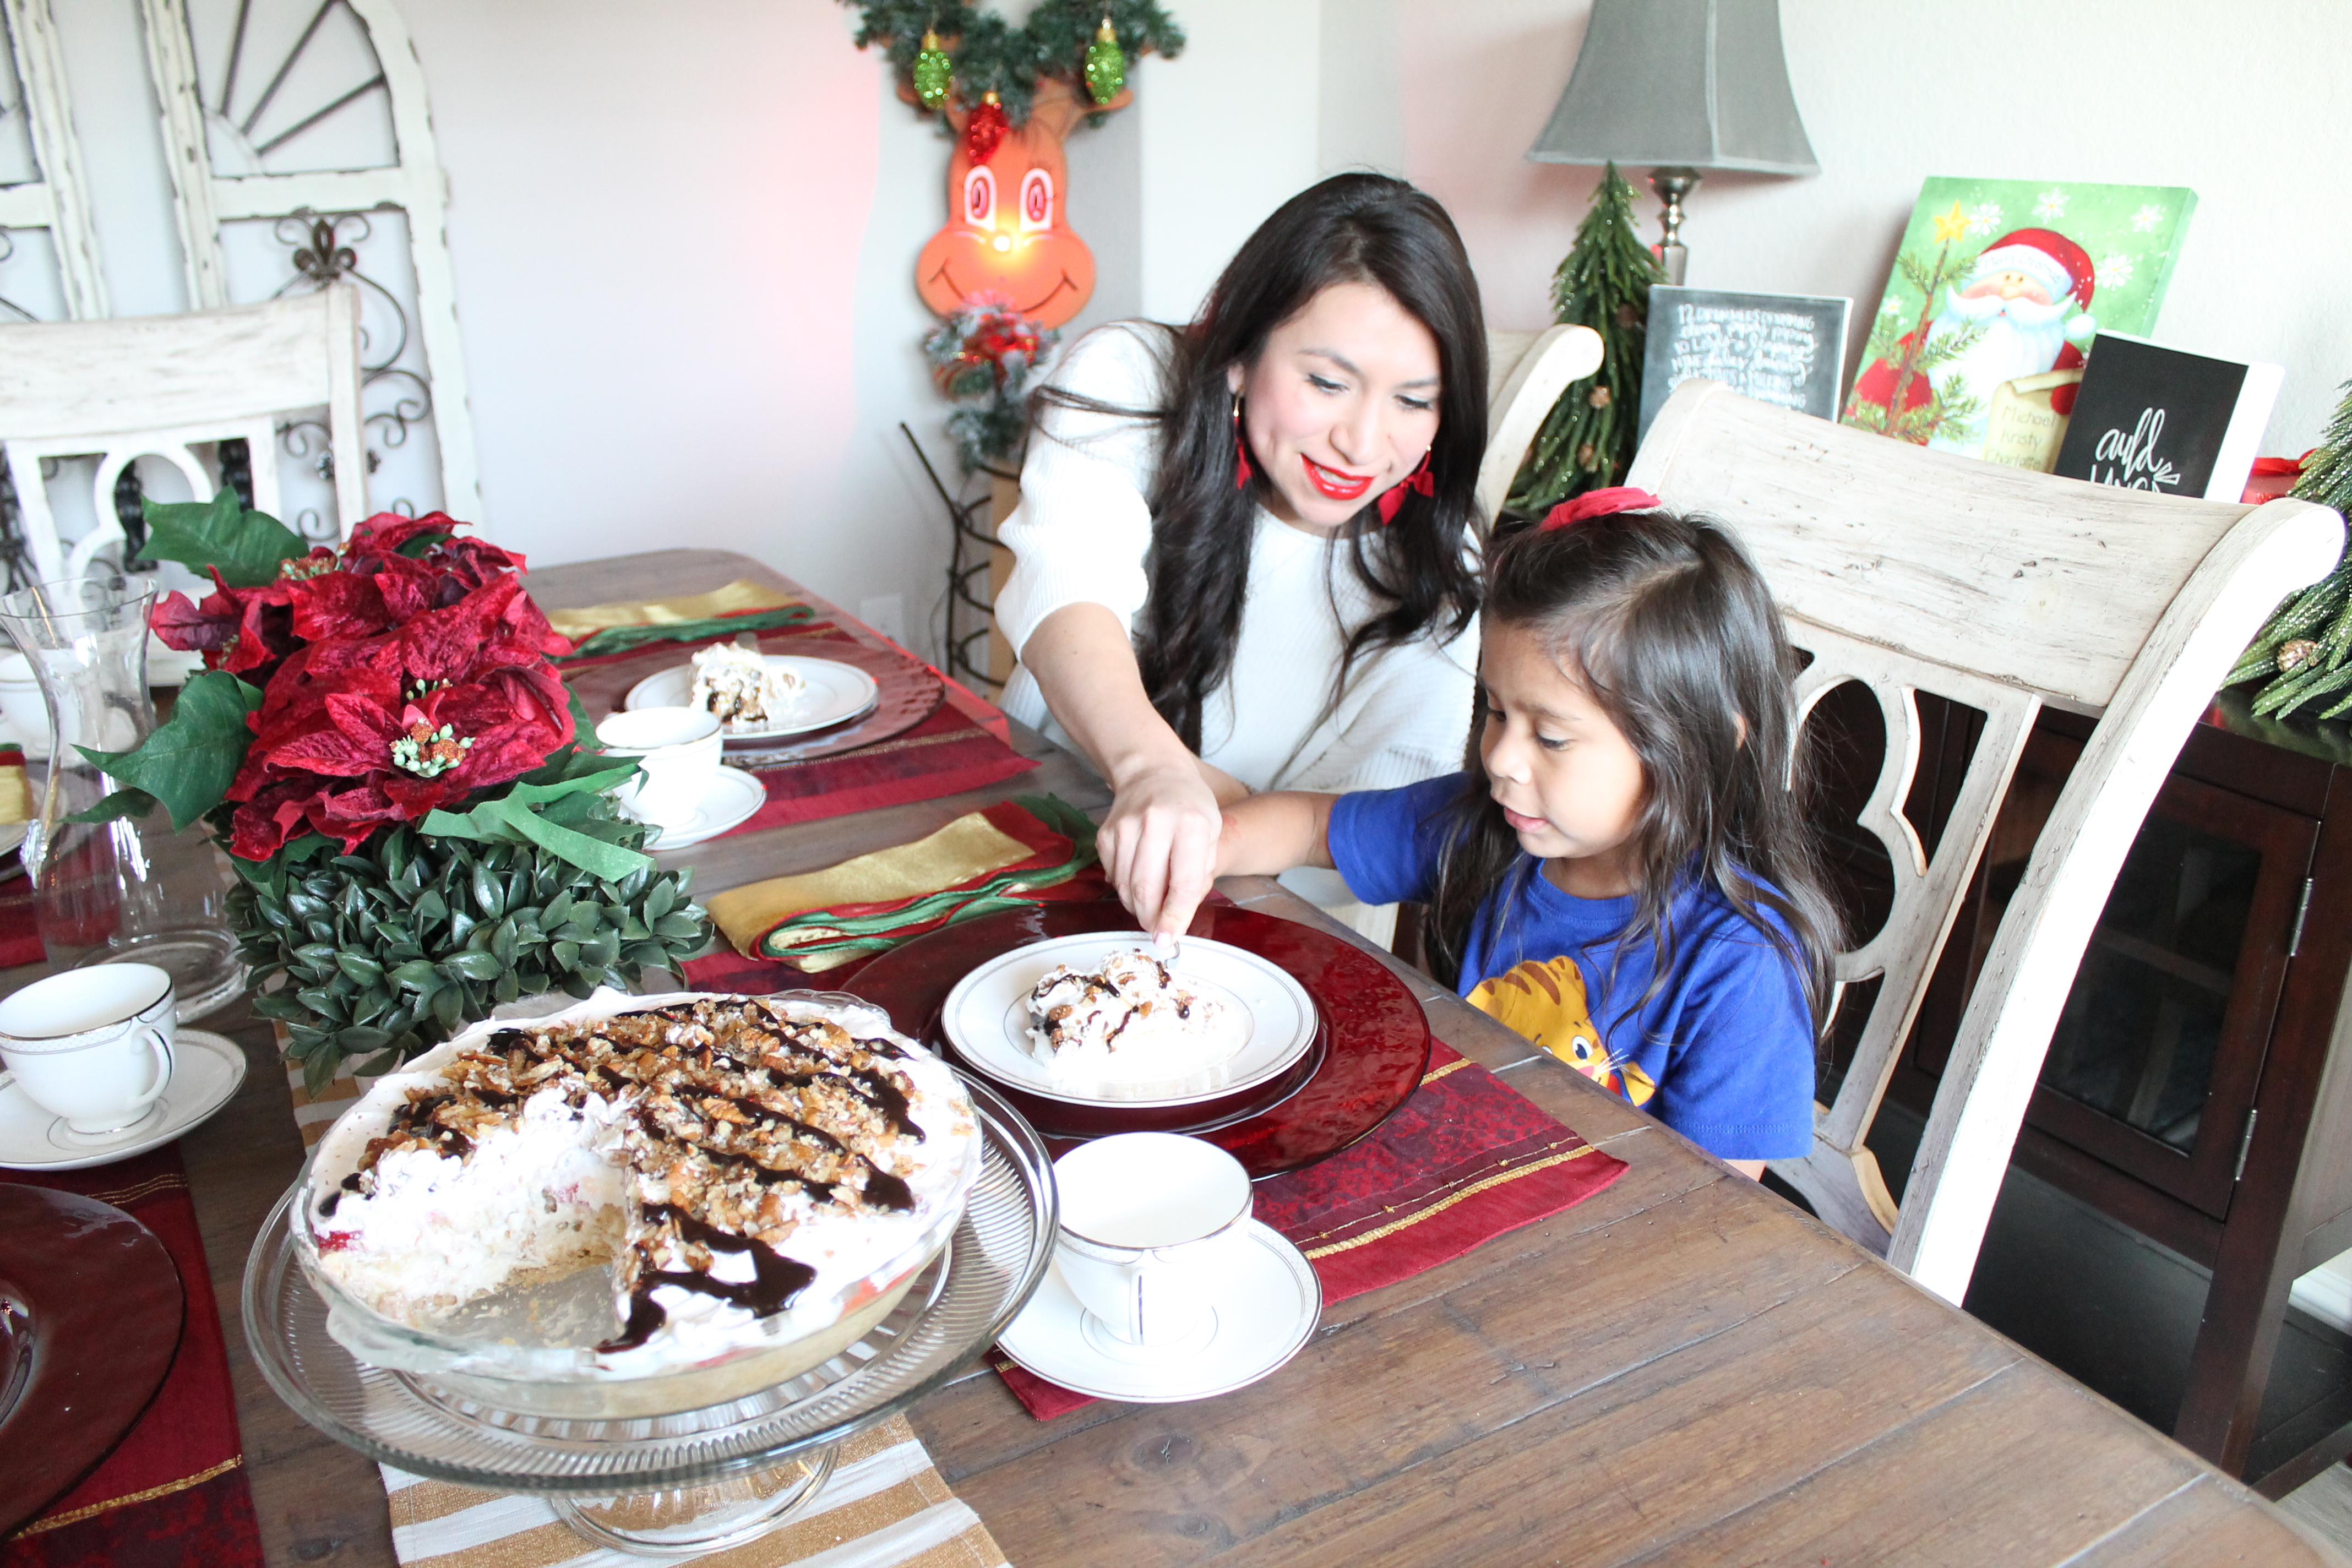 The yummiest no-bake banana split pie! La Lechera is our go-to brand for sweetened condensed milk, and this pie is so easy and delicious, you'll be so happy to share with your family! #AD #unidosconlalechera #unidoslalechera #nobakepie